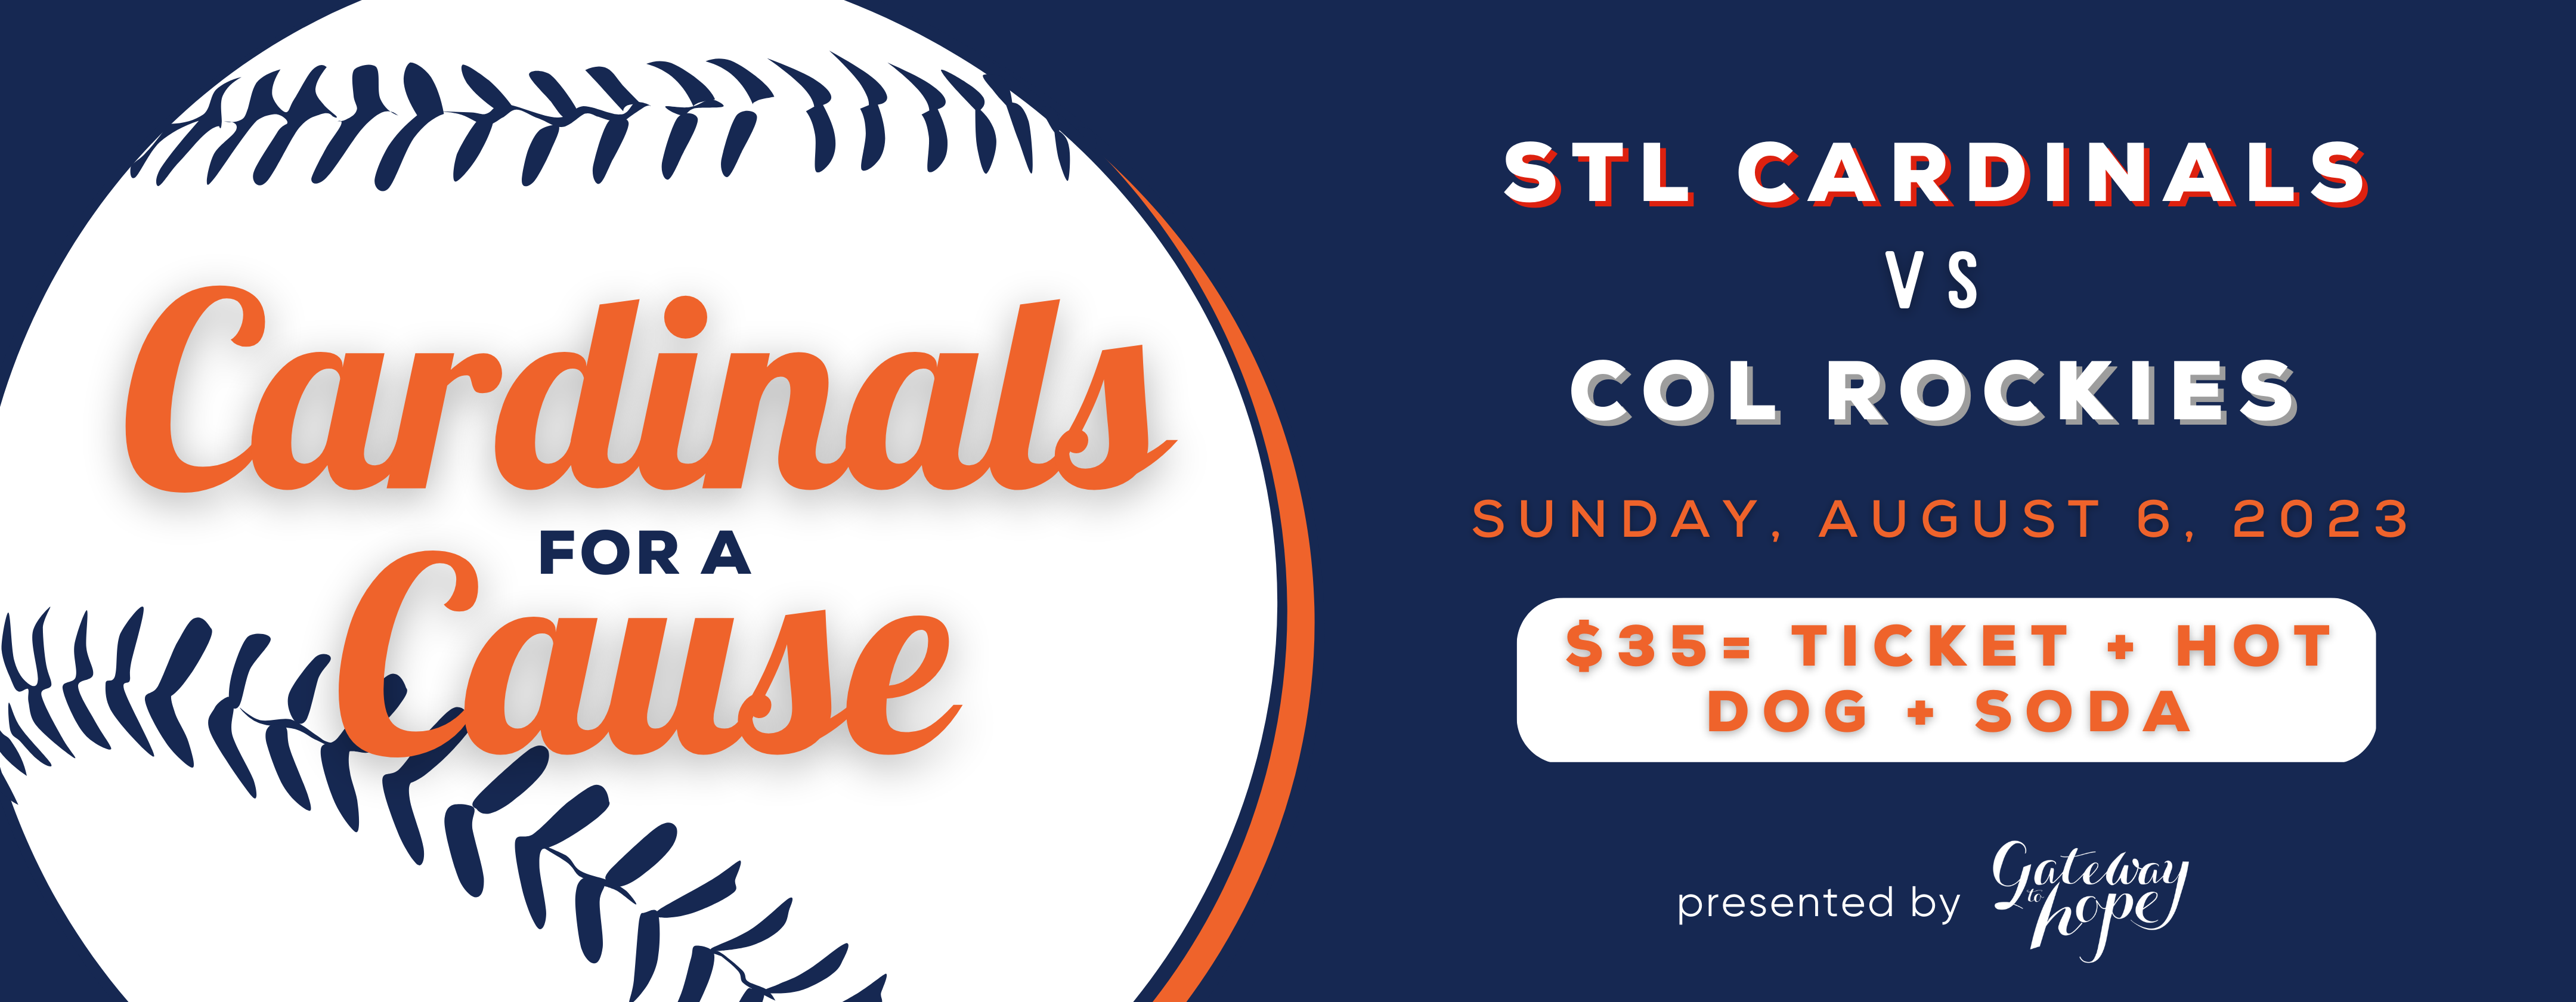 Go Cards! Learn about the Fall Fundraiser and the 2023 St. Louis